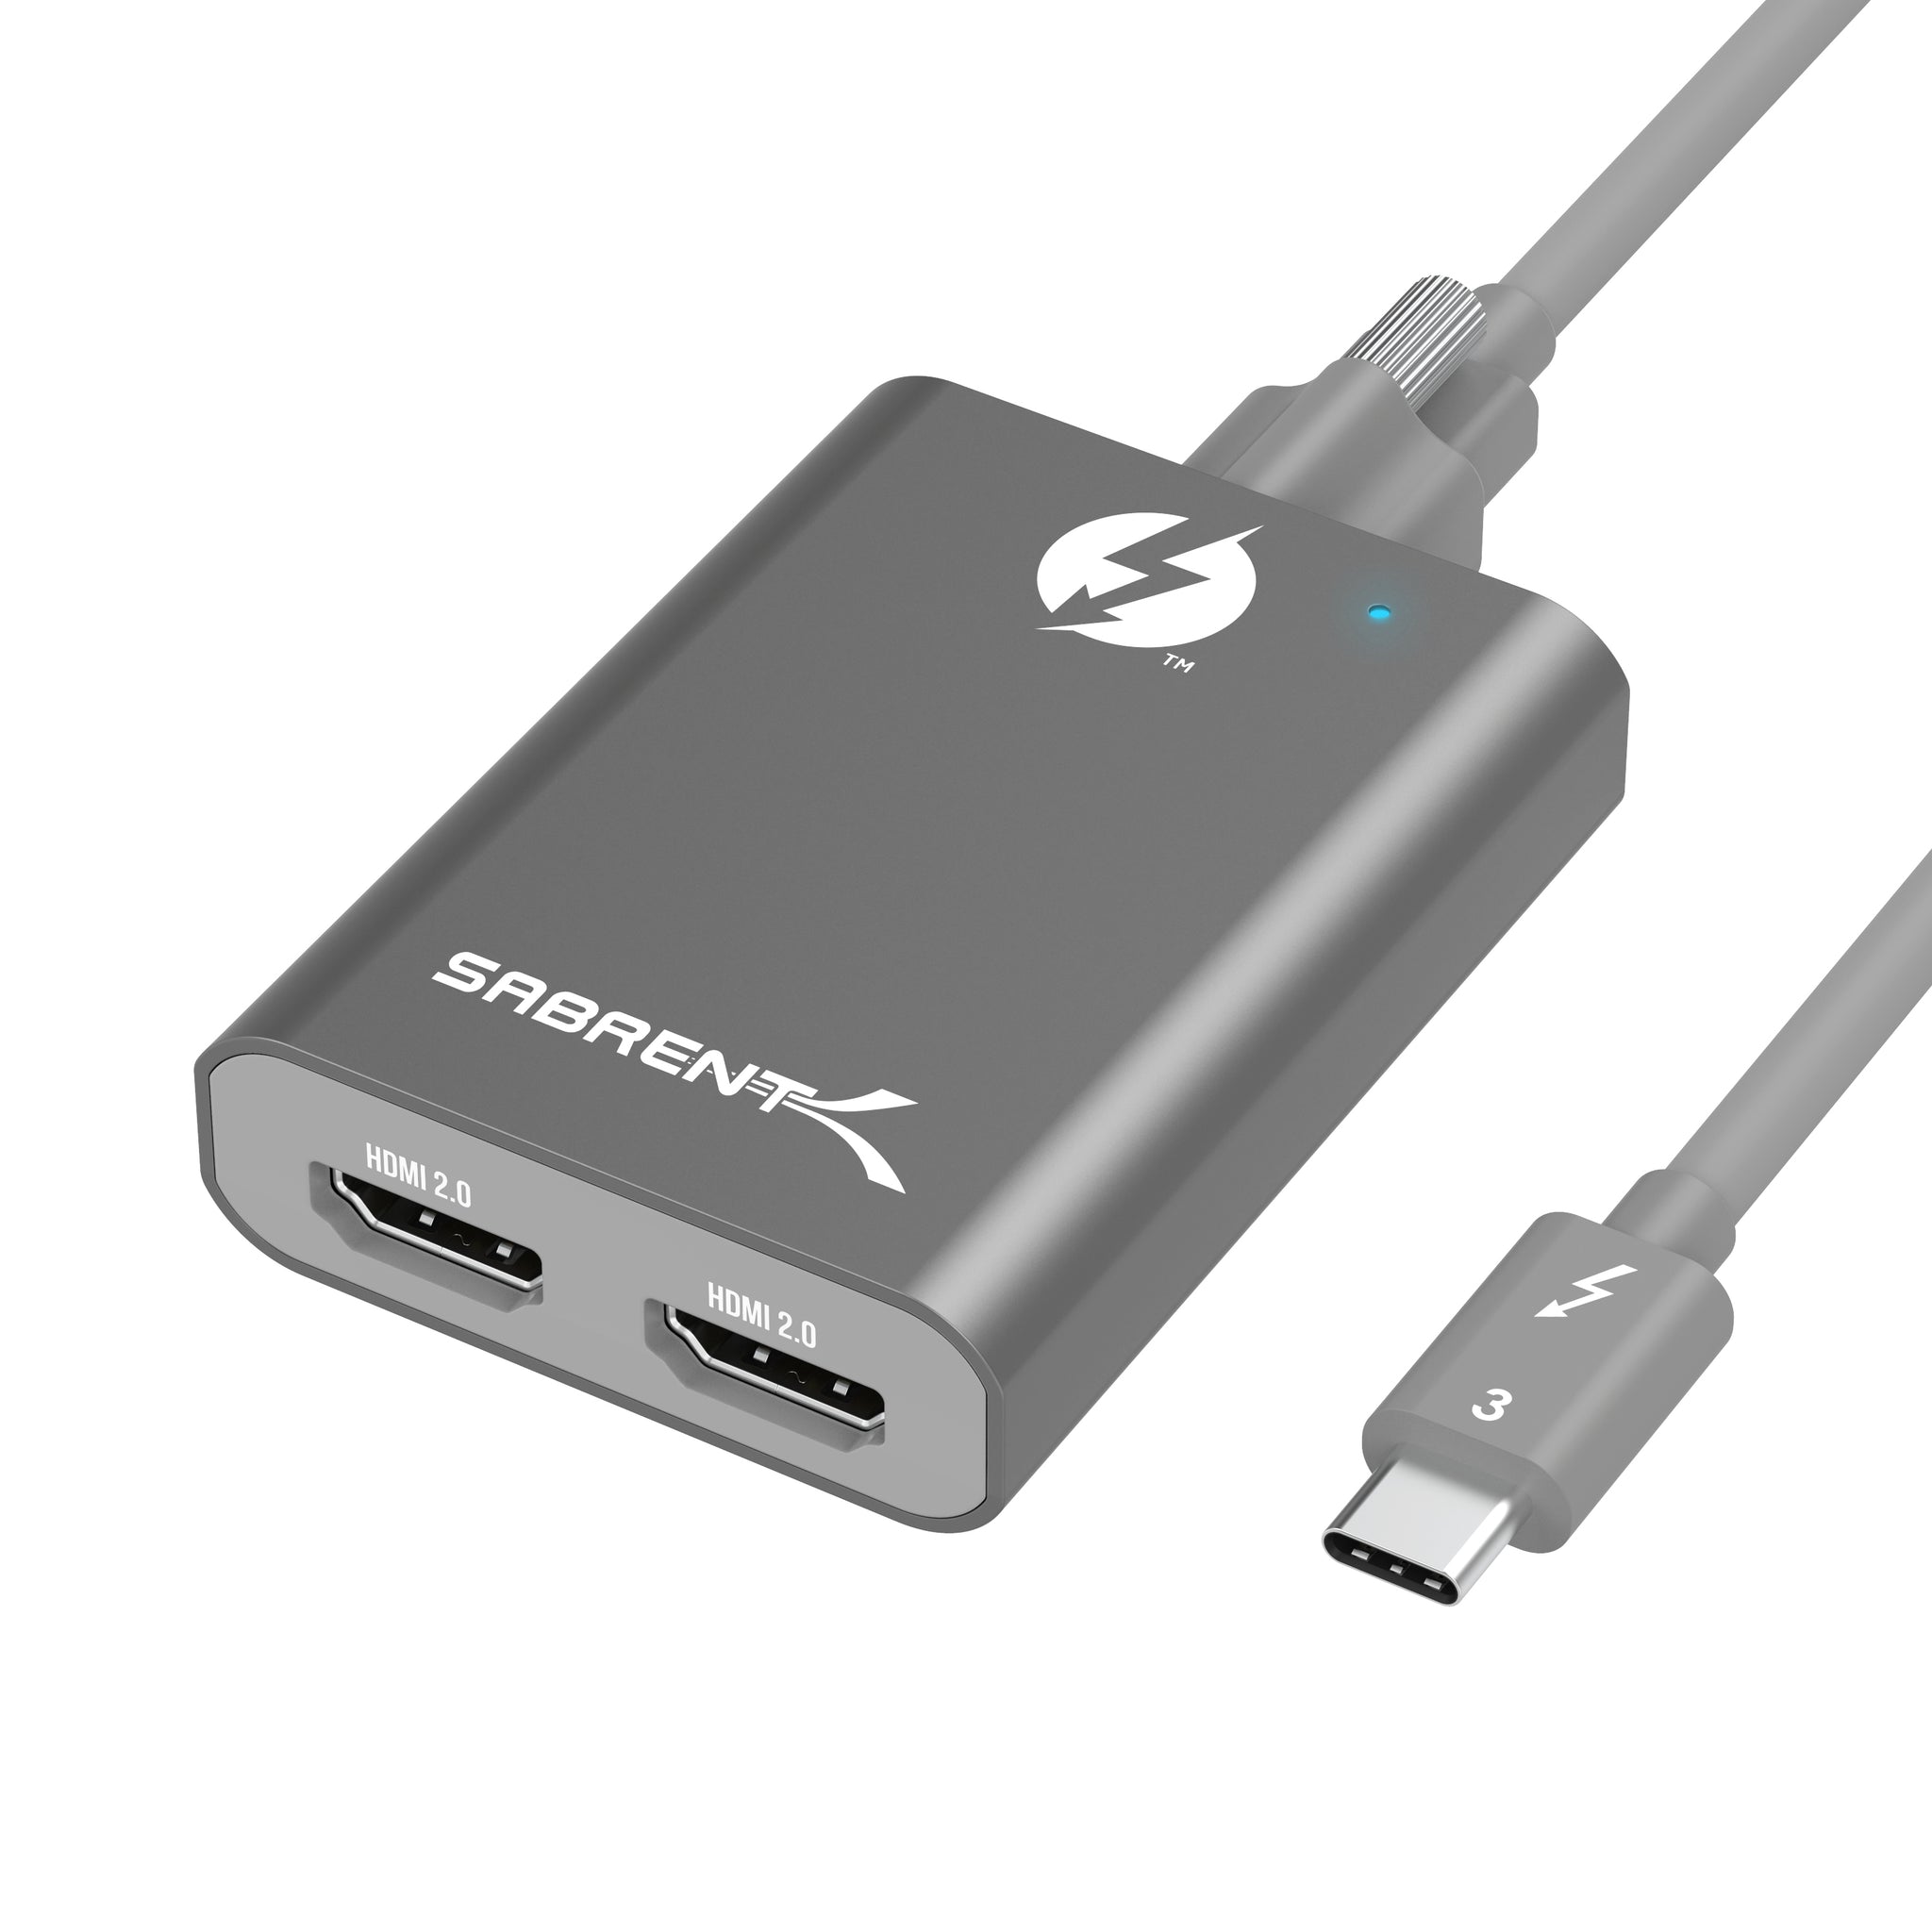 Thunderbolt 3 to Dual HDMI 2.0 Adapter - Sabrent